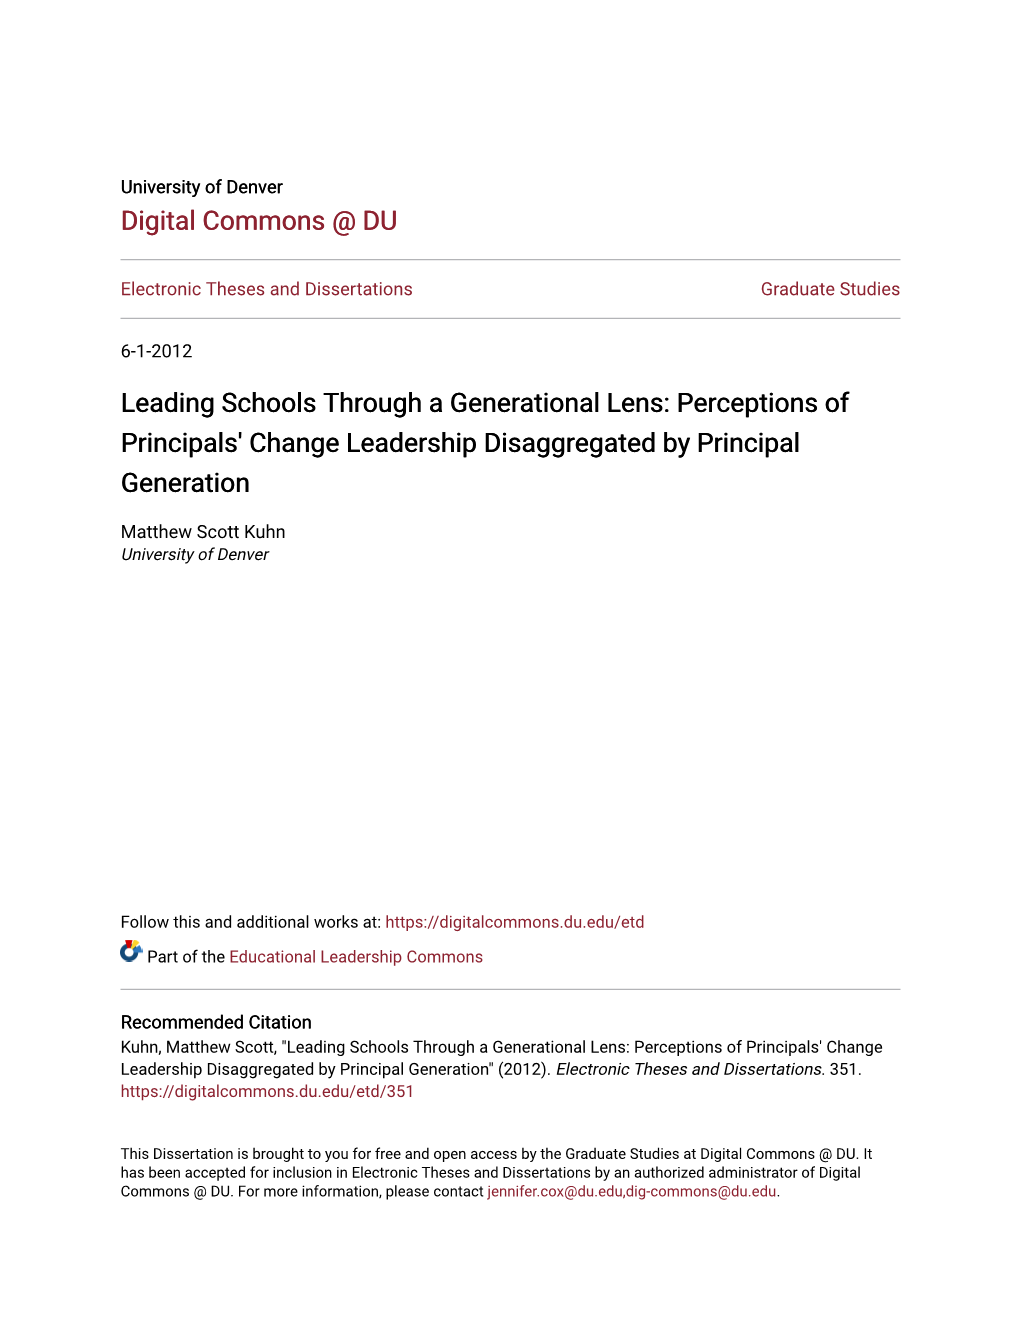 Leading Schools Through a Generational Lens: Perceptions of Principals' Change Leadership Disaggregated by Principal Generation